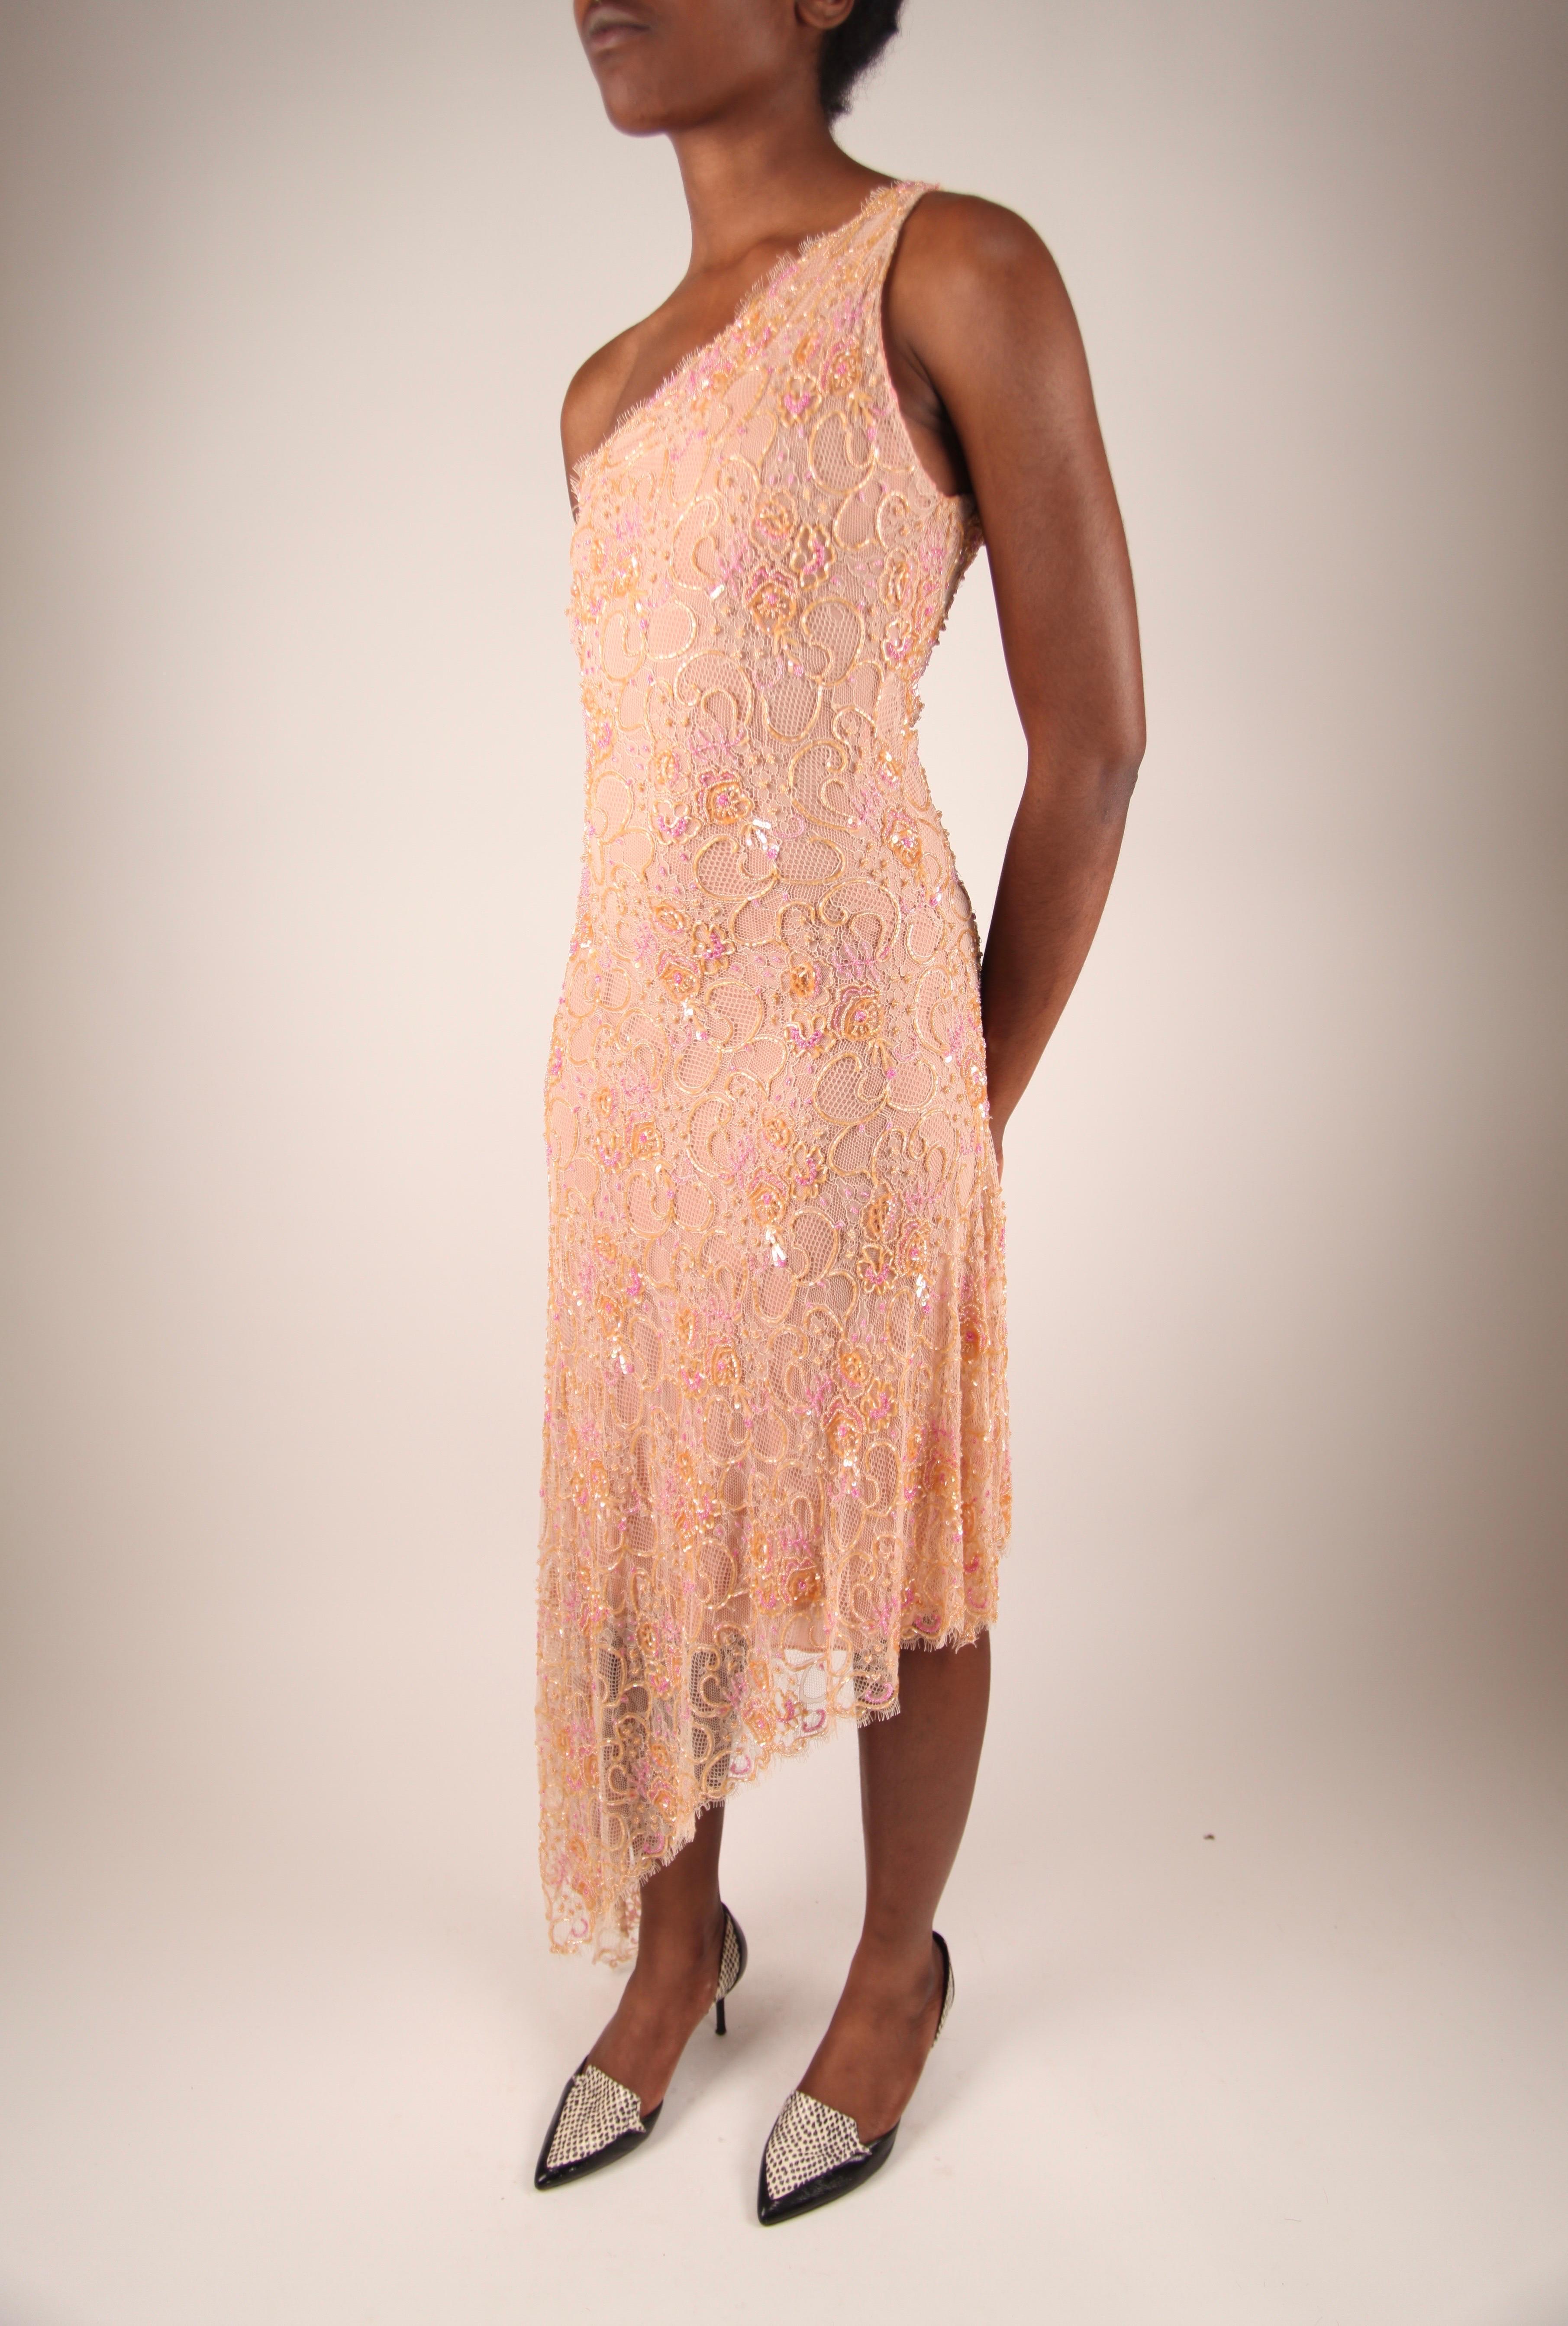 Dior asymmetric hand beaded lace dress, circa 2000s In Good Condition For Sale In London, GB